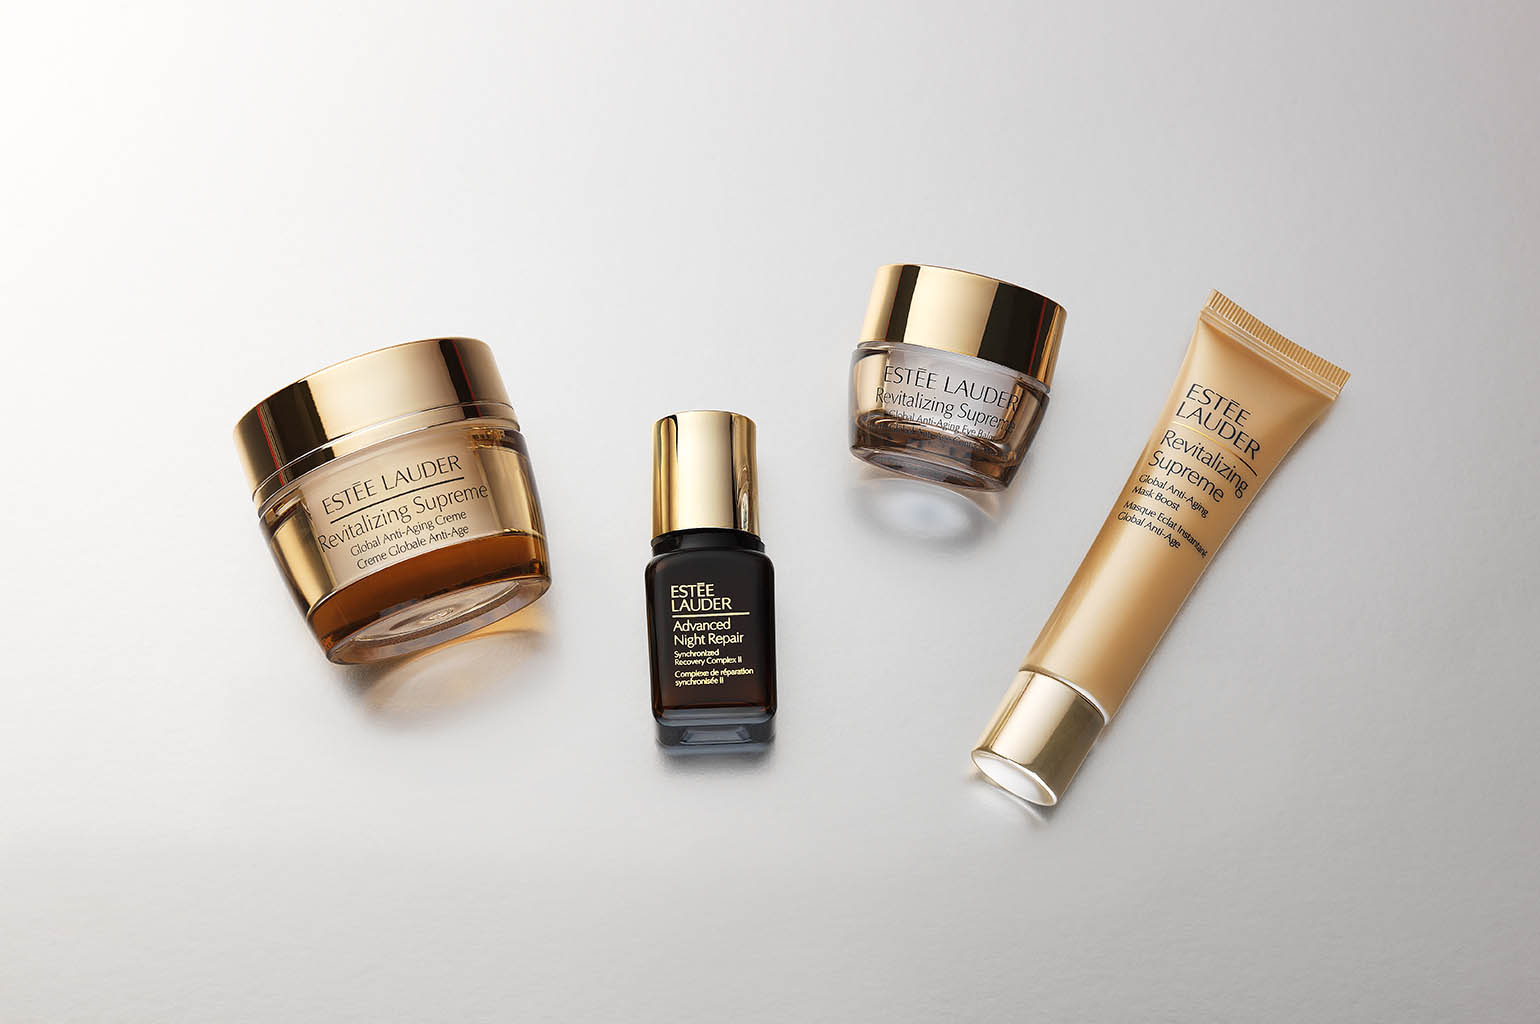 Cosmetics Photography of Estee Lauder skin care products by Packshot Factory